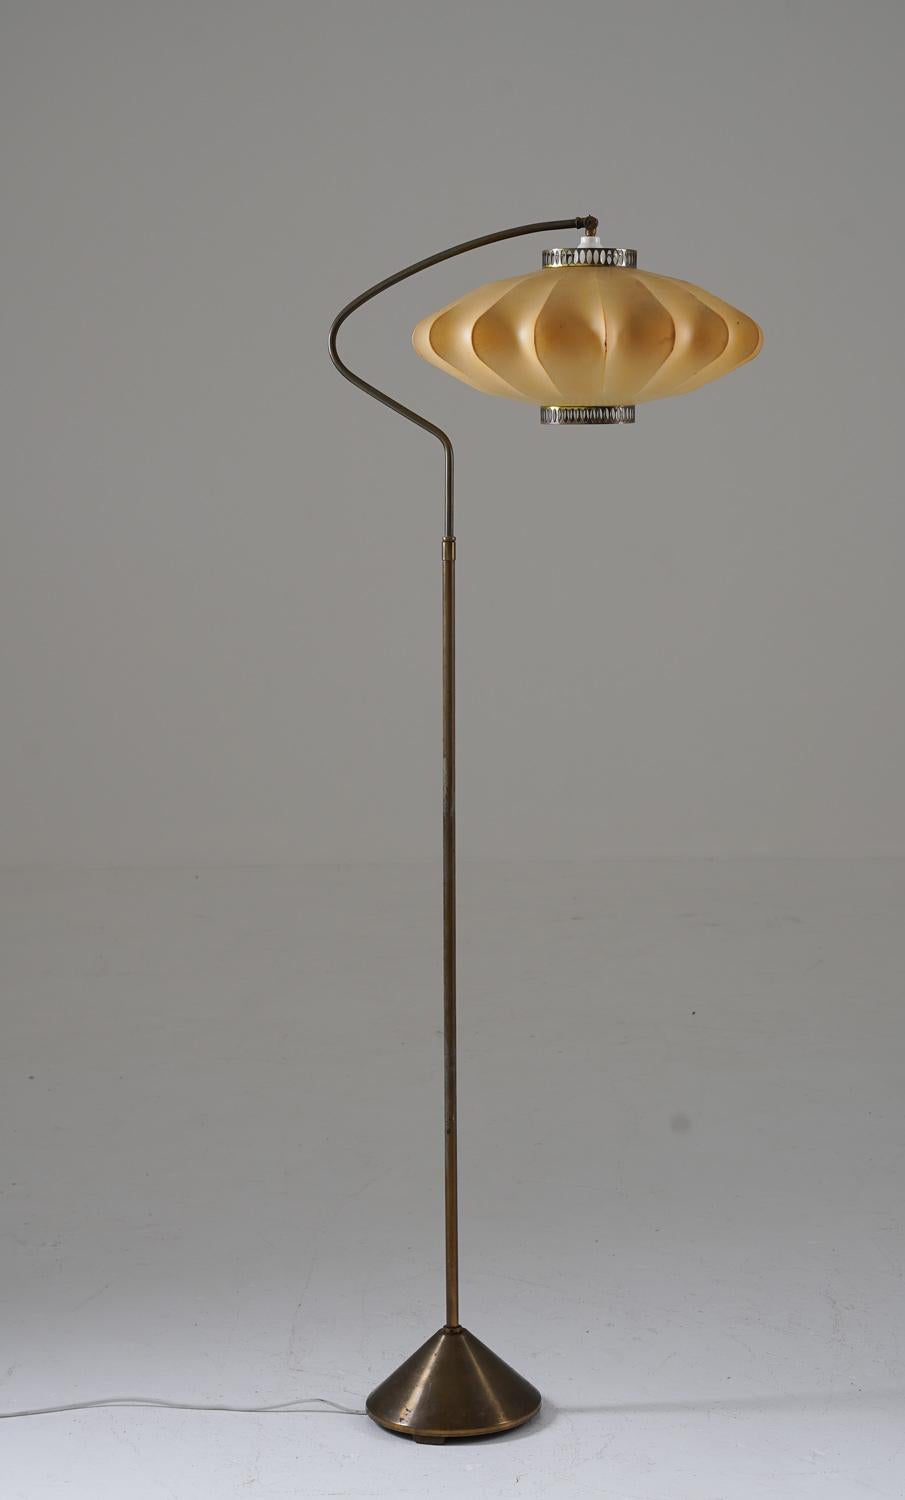 Beautiful floor lamp manufactured in Denmark, 1950s.
This floor lamp consists of a beautifully curved brass rod, supported by a cone-shaped base. The light source is hidden by a large cocoon shade with perforated brass details.

Condition: Good